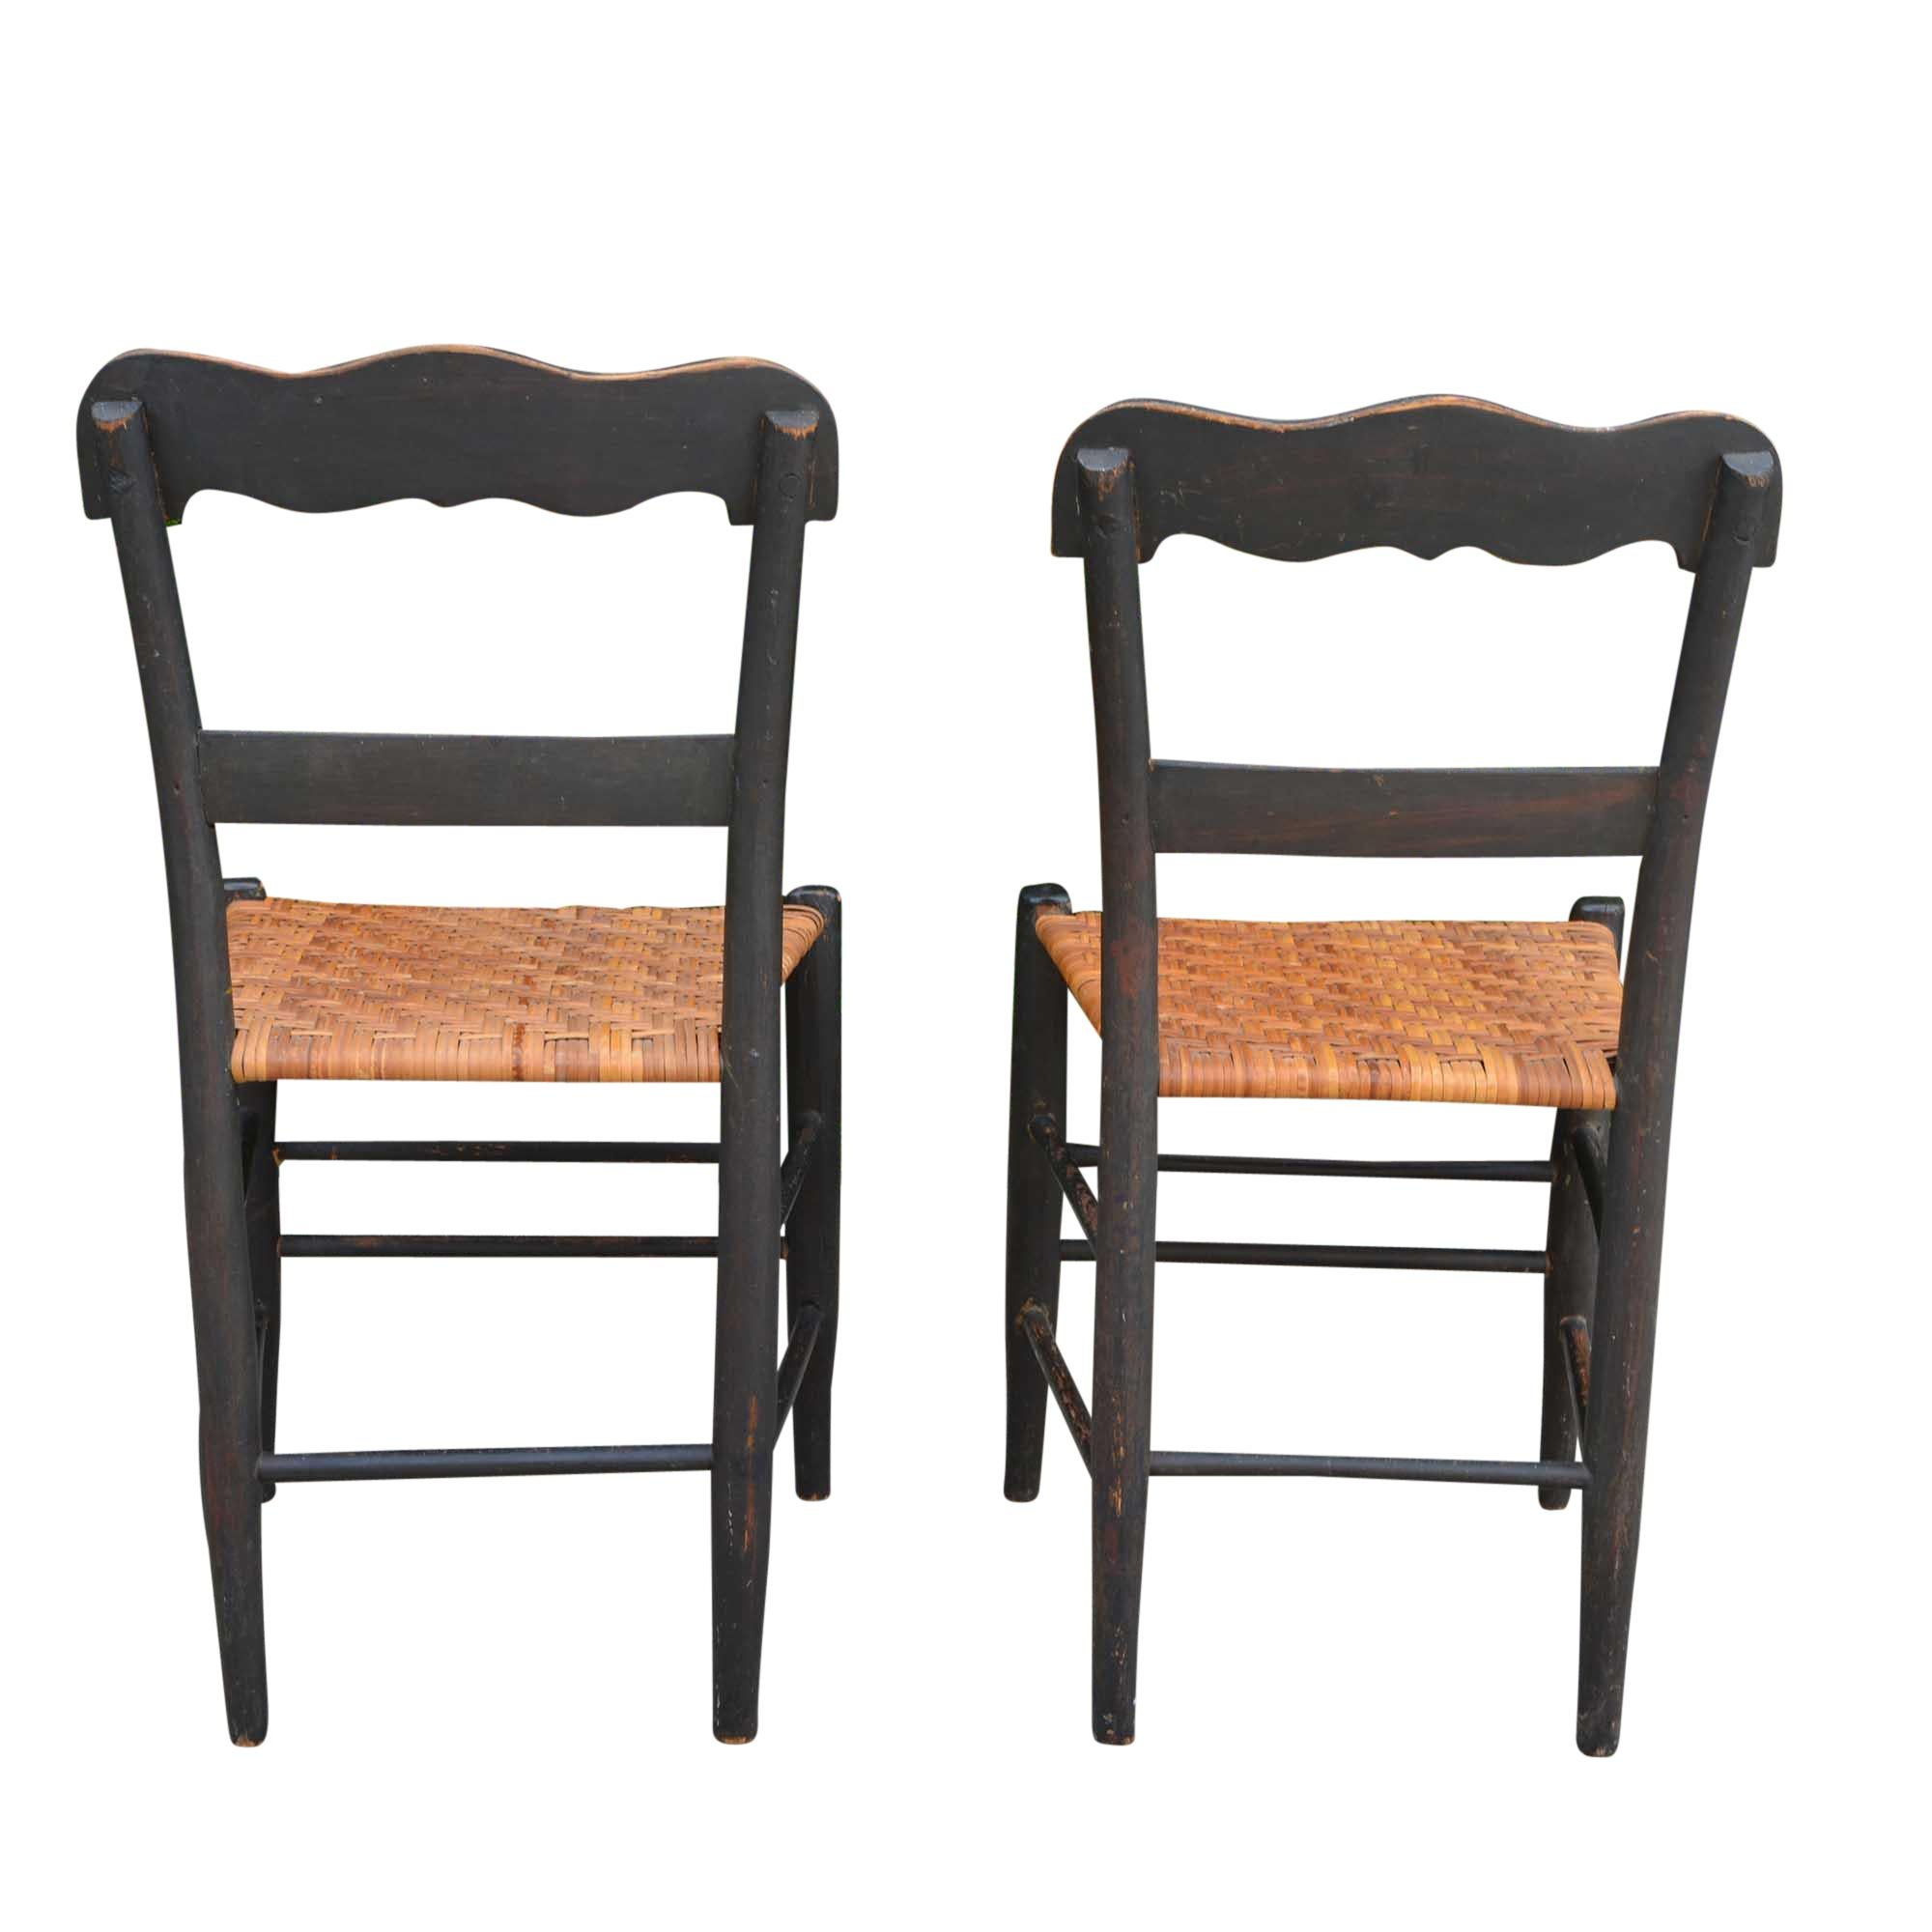 19th Century Antique American Country Sheraton Cane Seat Chairs Pair For Sale